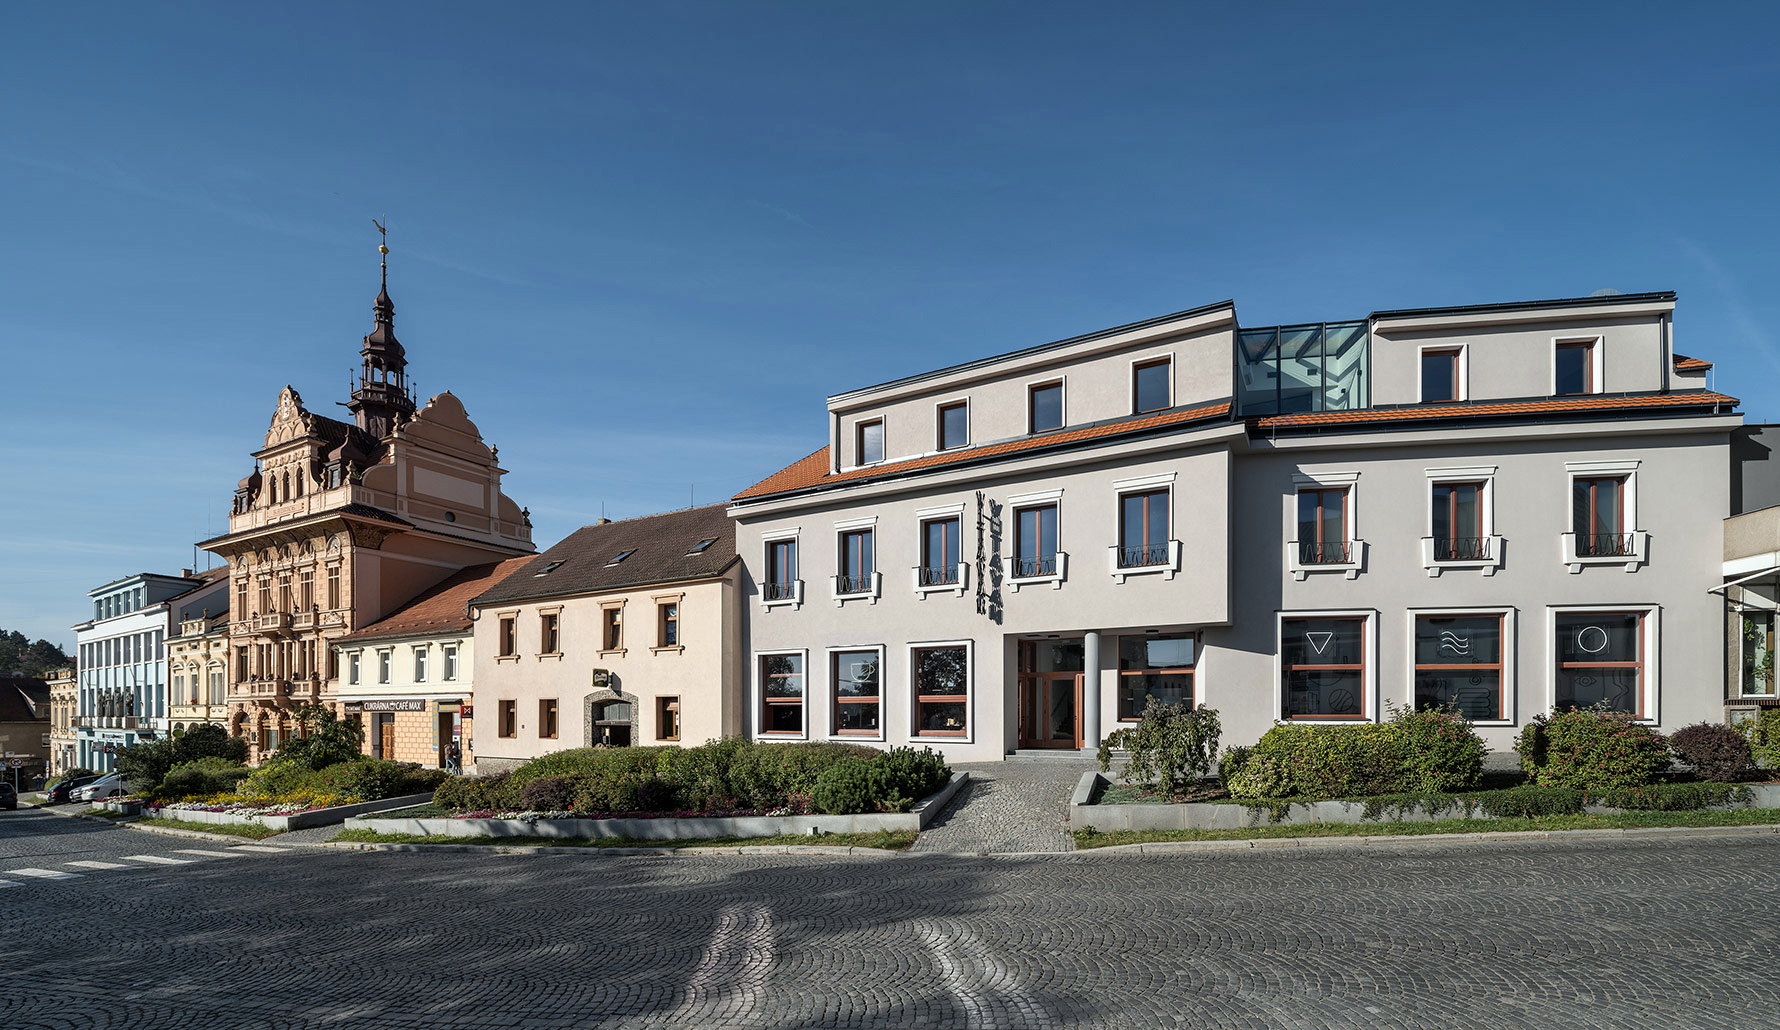 CONVERSION OF THE VLTAVAN HOTEL IN SEDLČANY TO A MIXED-USE MUNICIPAL HOUSE/ 2021